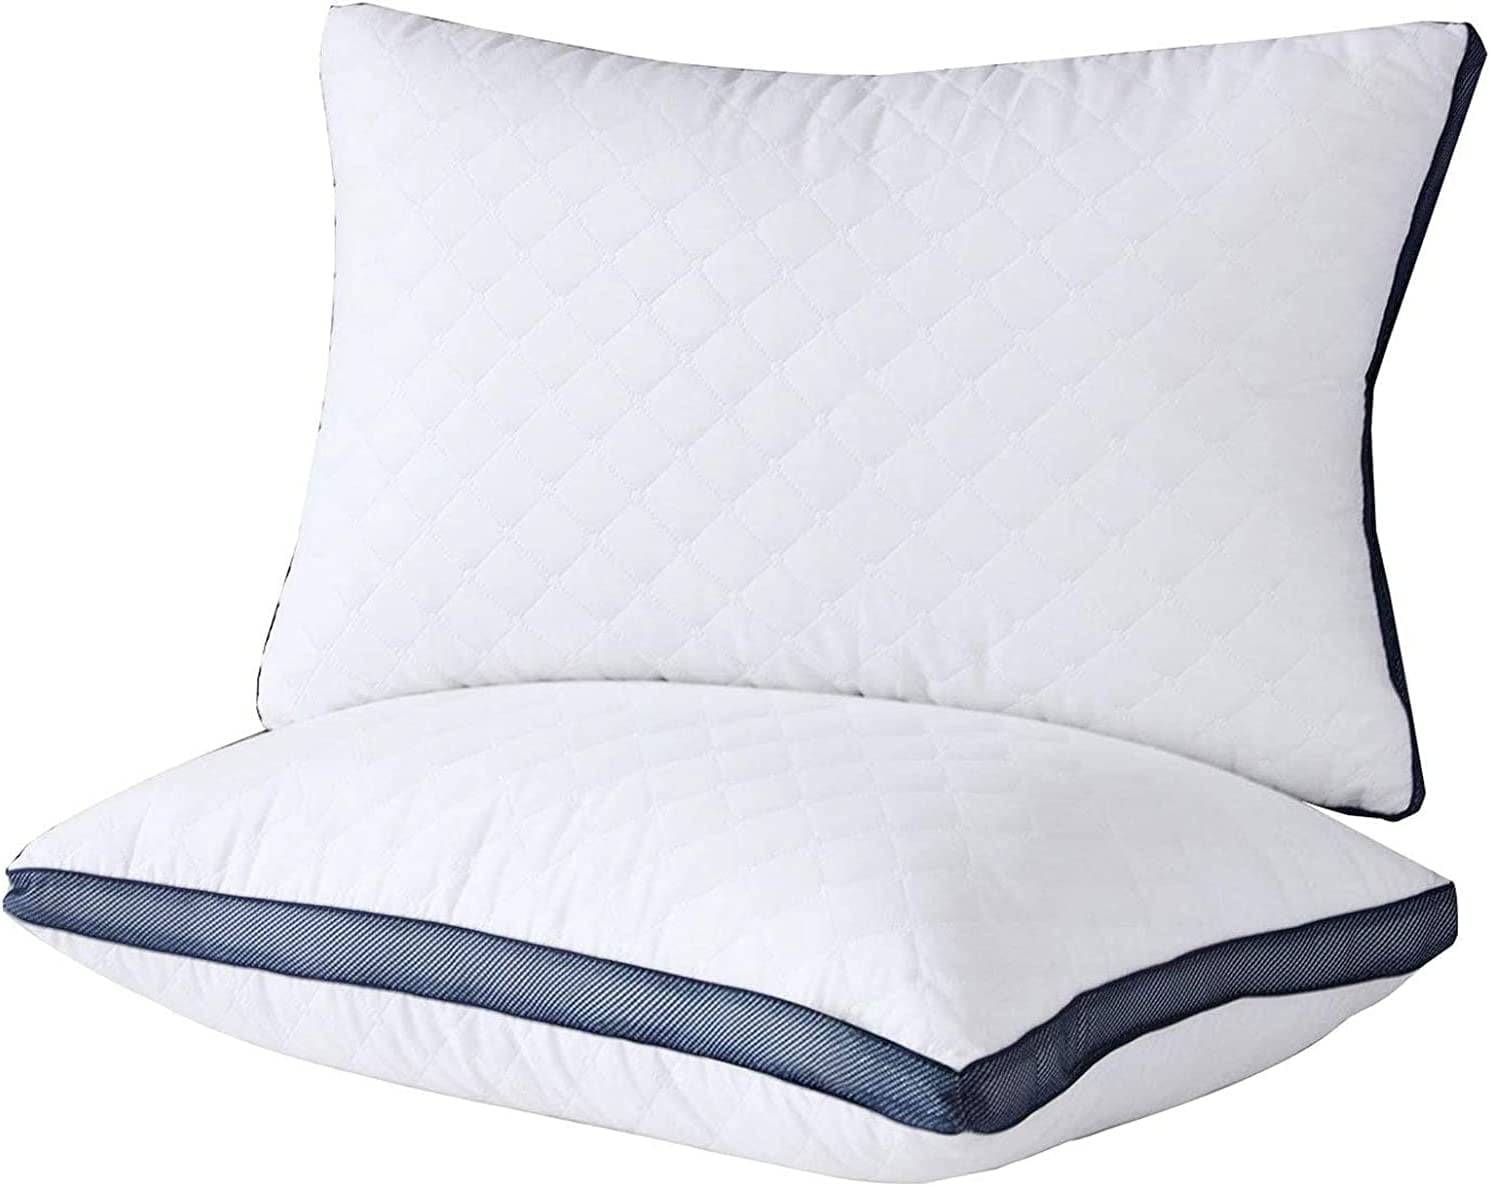 EIUE Bed Pillows for Sleeping 4 Pack Queen Size，Pillows for Side